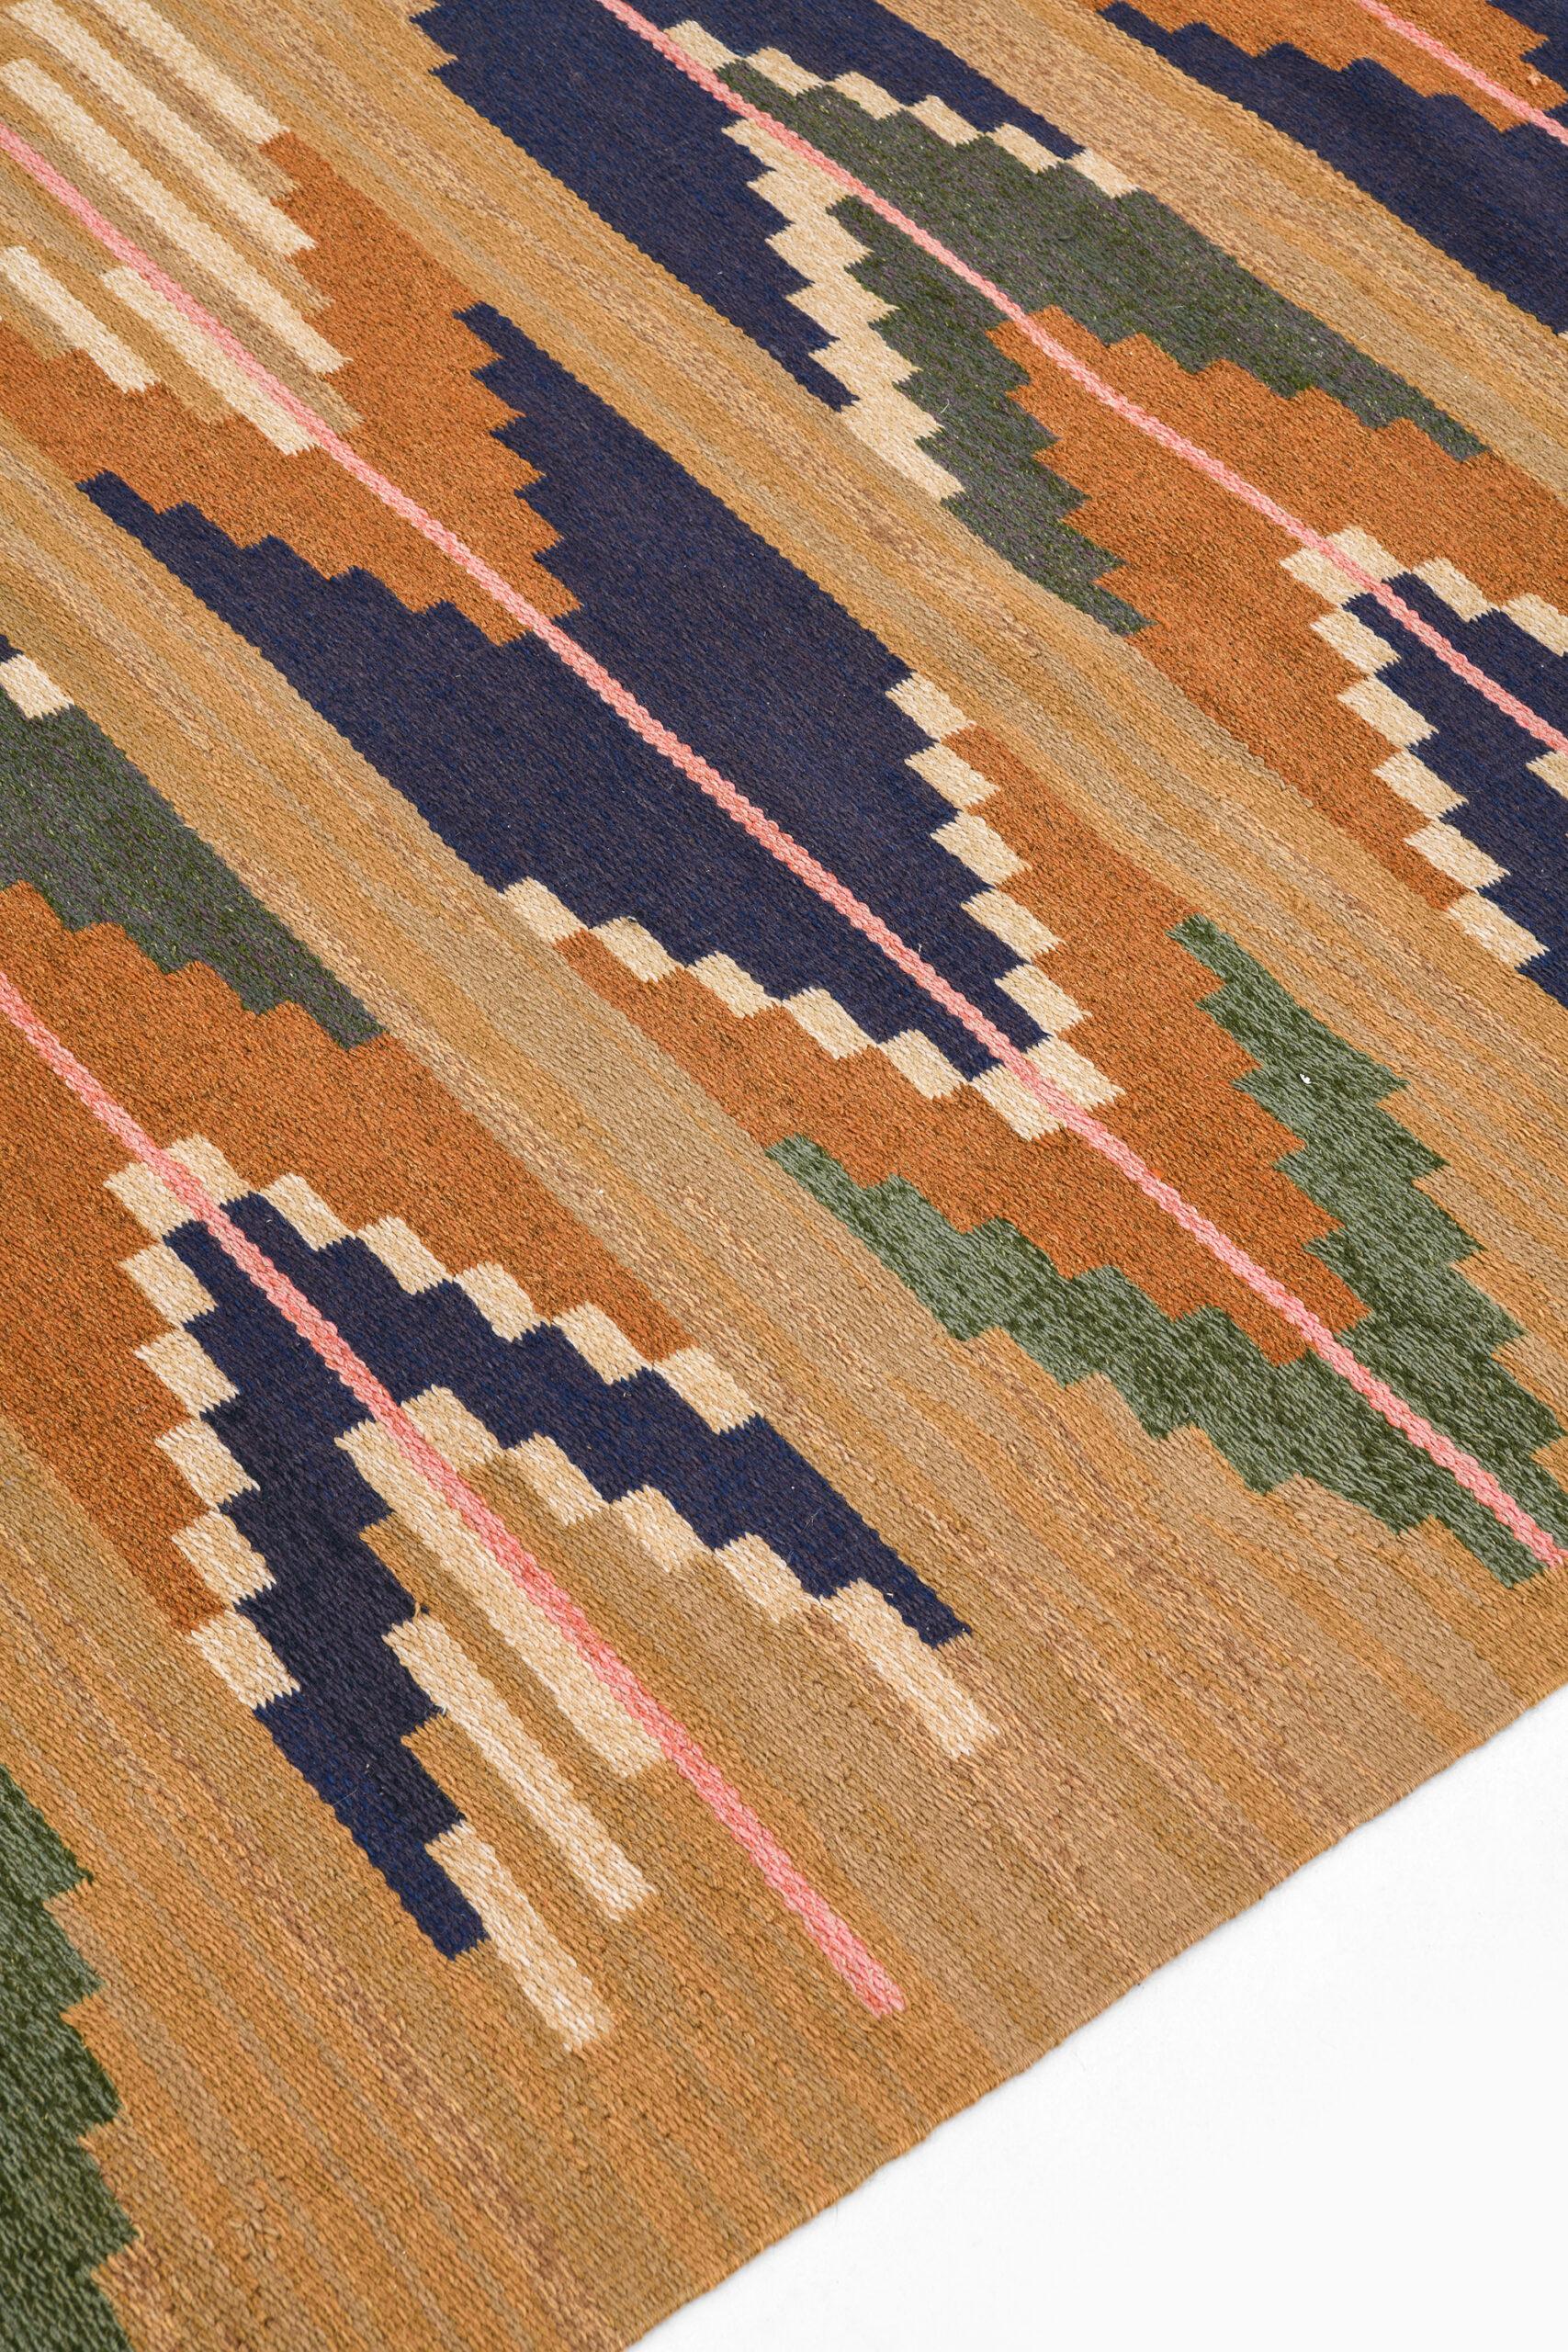 Rare carpet by unknown designer. Produced in Sweden.